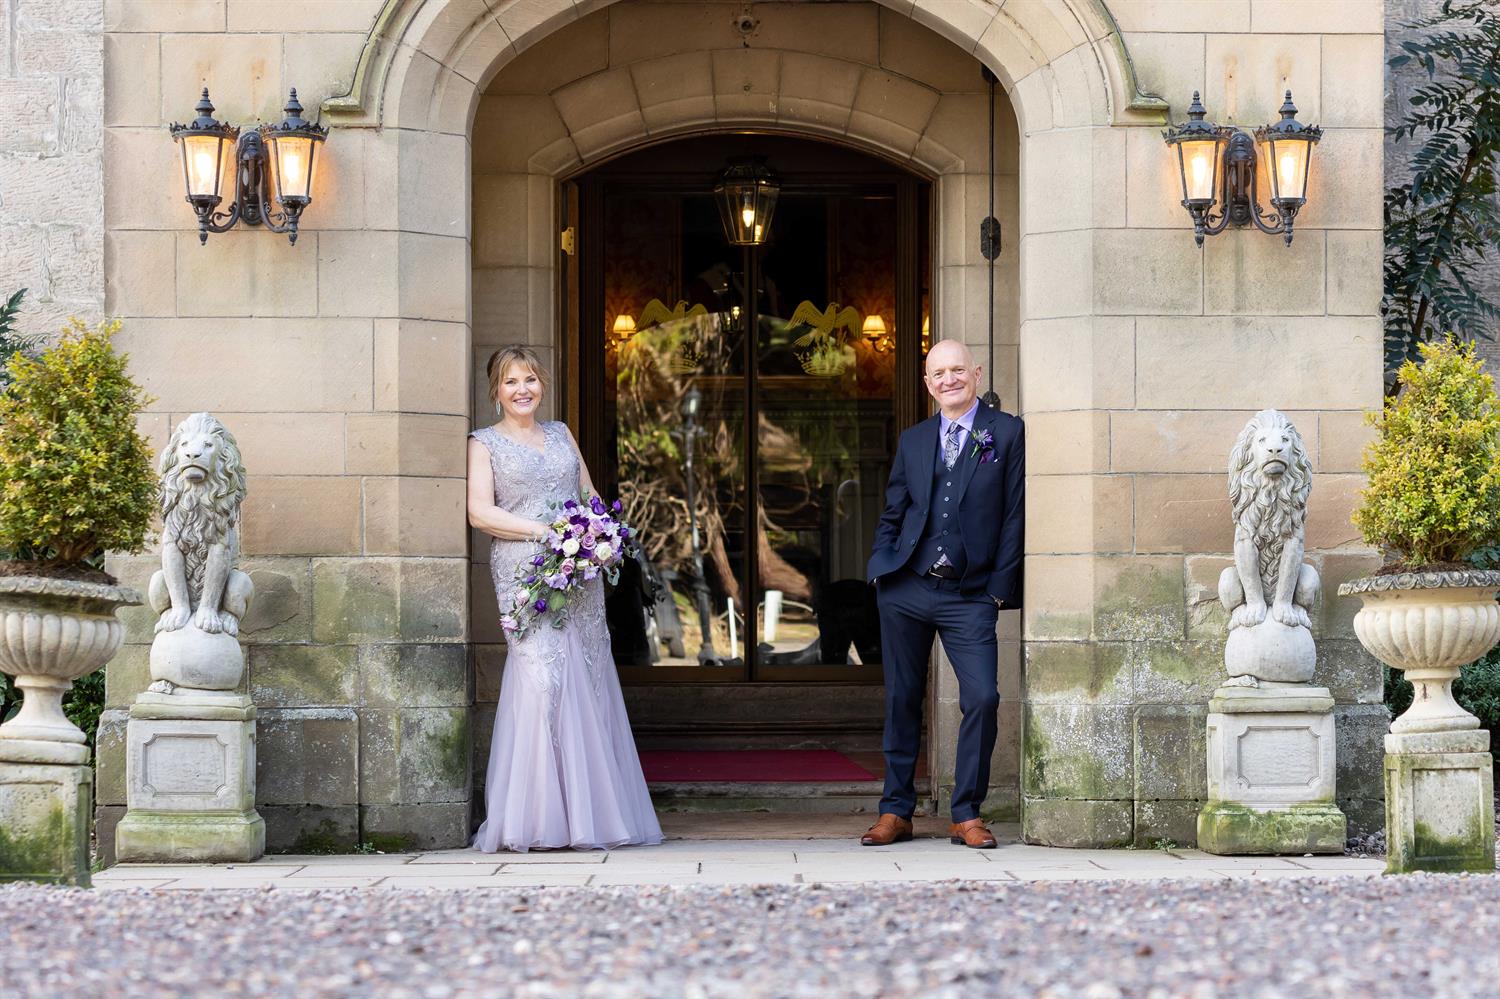 Bride and groom at the castle's entrance